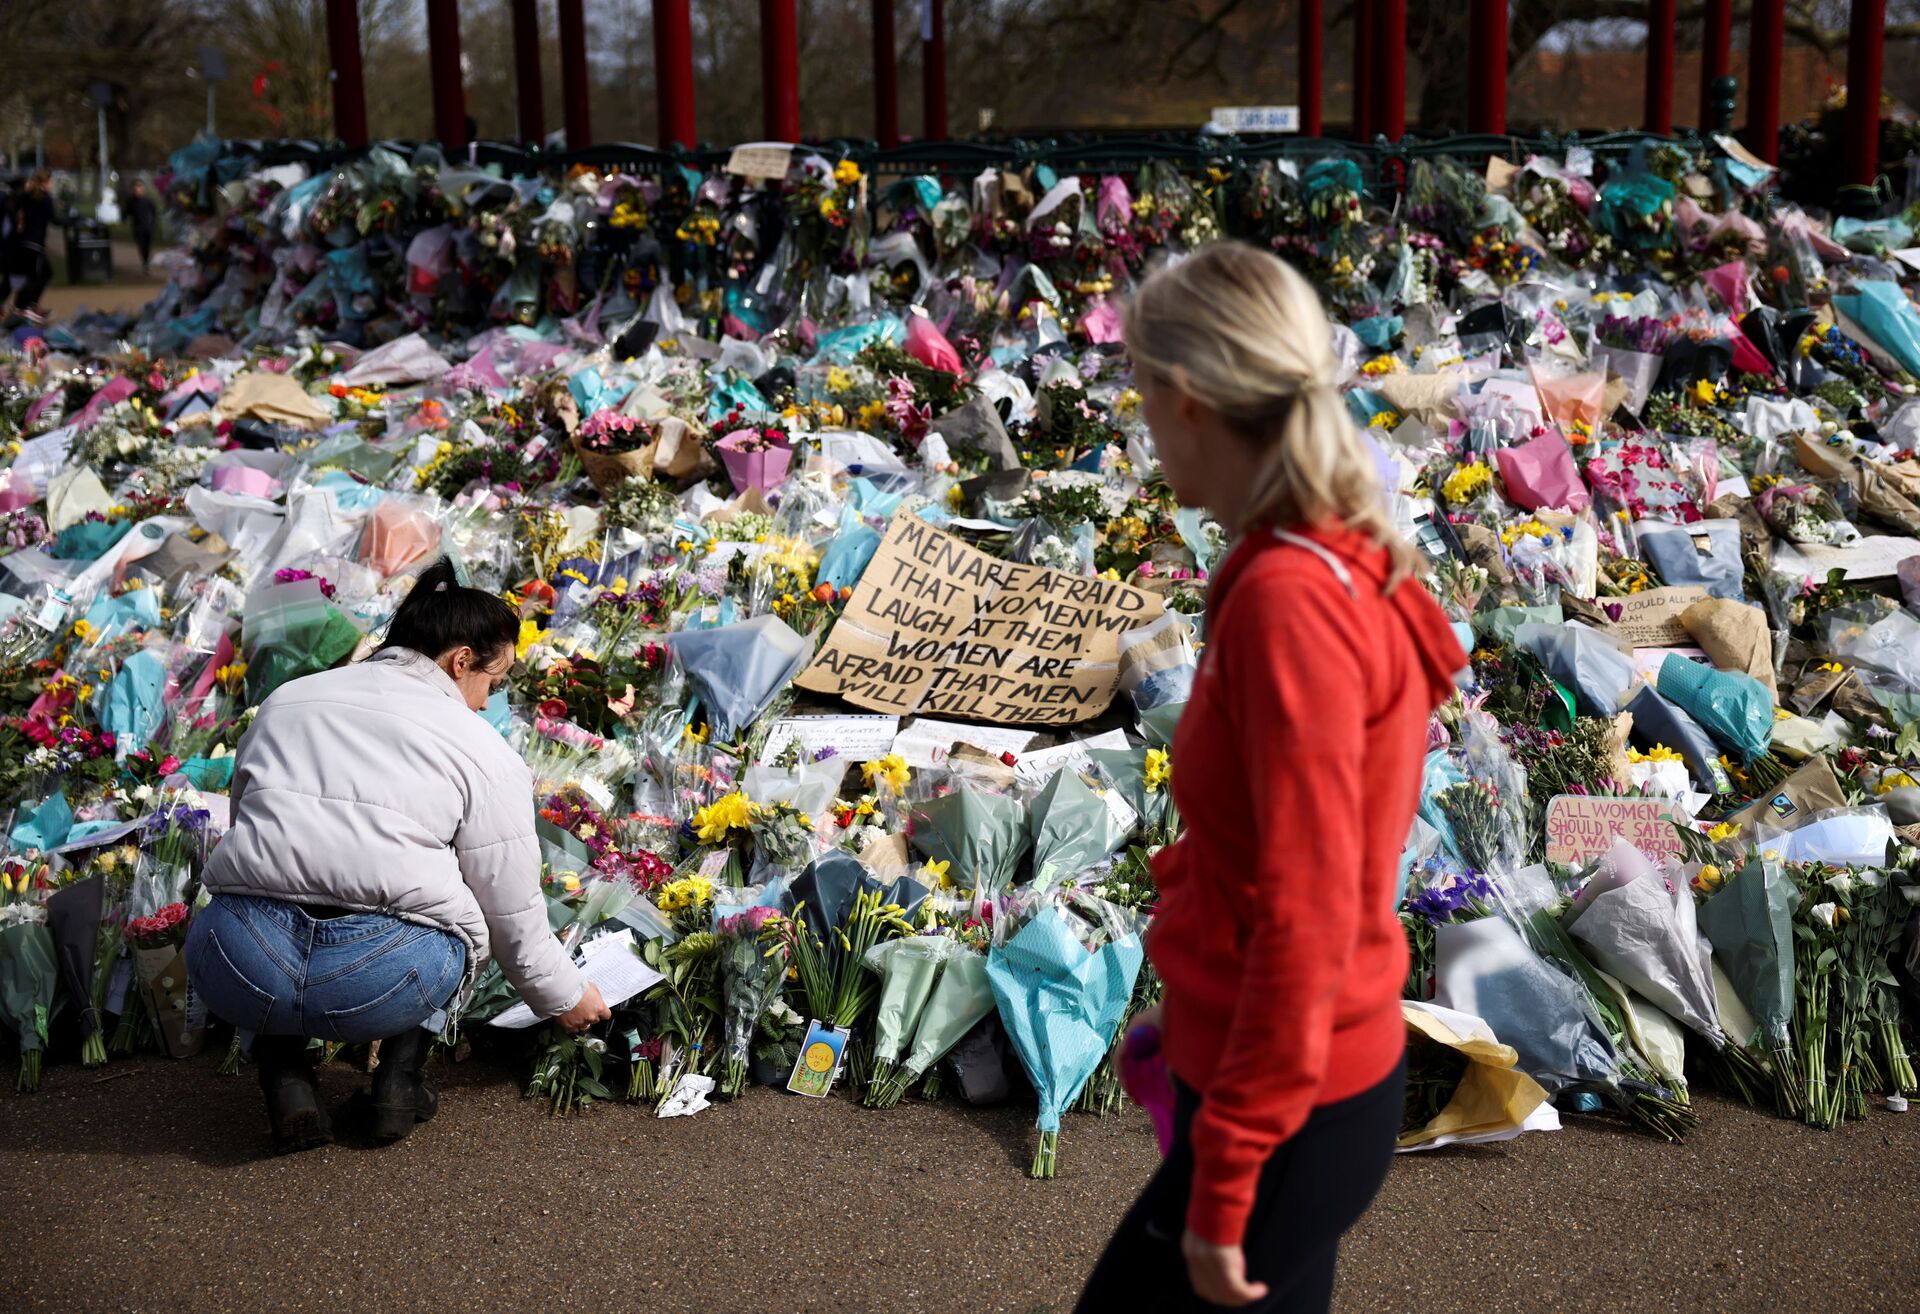 People observe a memorial site at the Clapham Common Bandstand, following the kidnapping and murder of Sarah Everard, in London, Britain, March 21, 2021 - Sputnik International, 1920, 16.11.2021